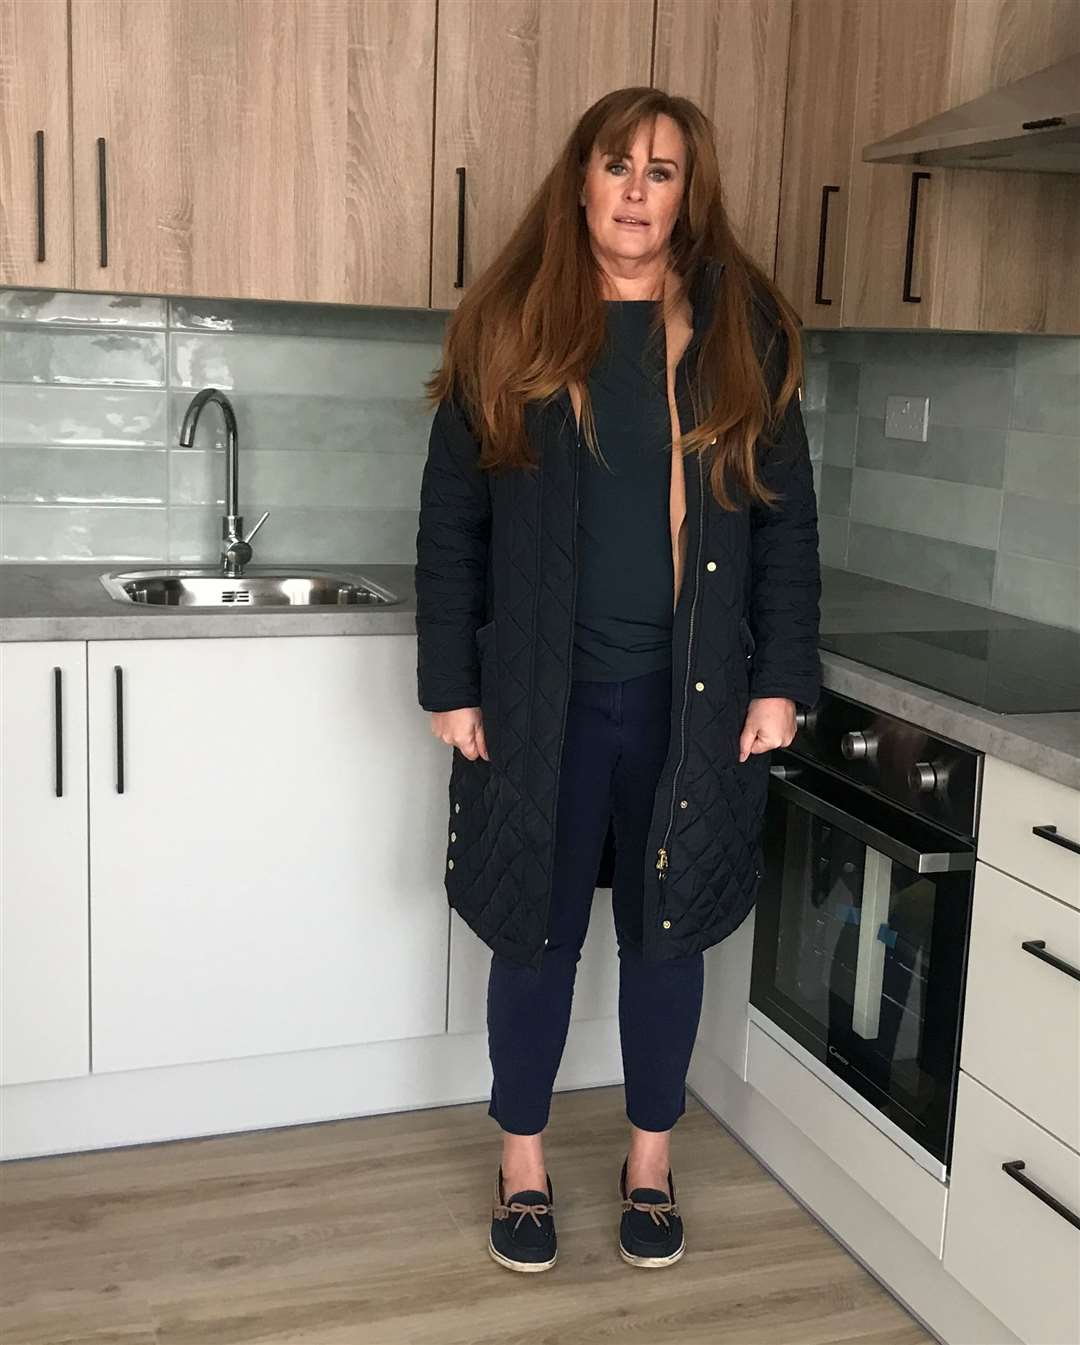 Rochester and Strood MP Kelly Tolhurst tours new flats